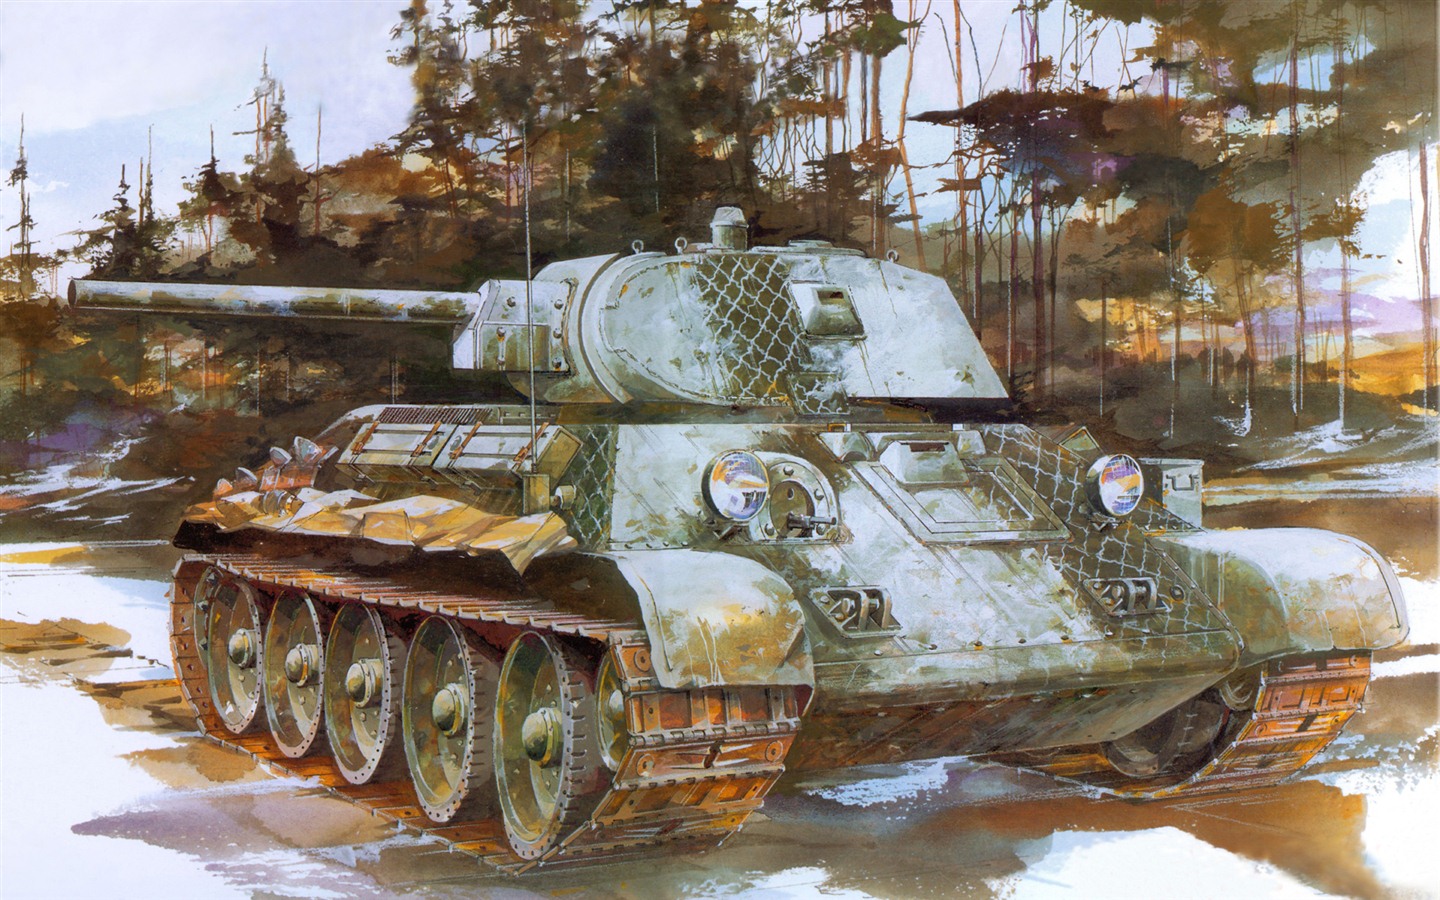 Military tanks, armored HD painting wallpapers #8 - 1440x900